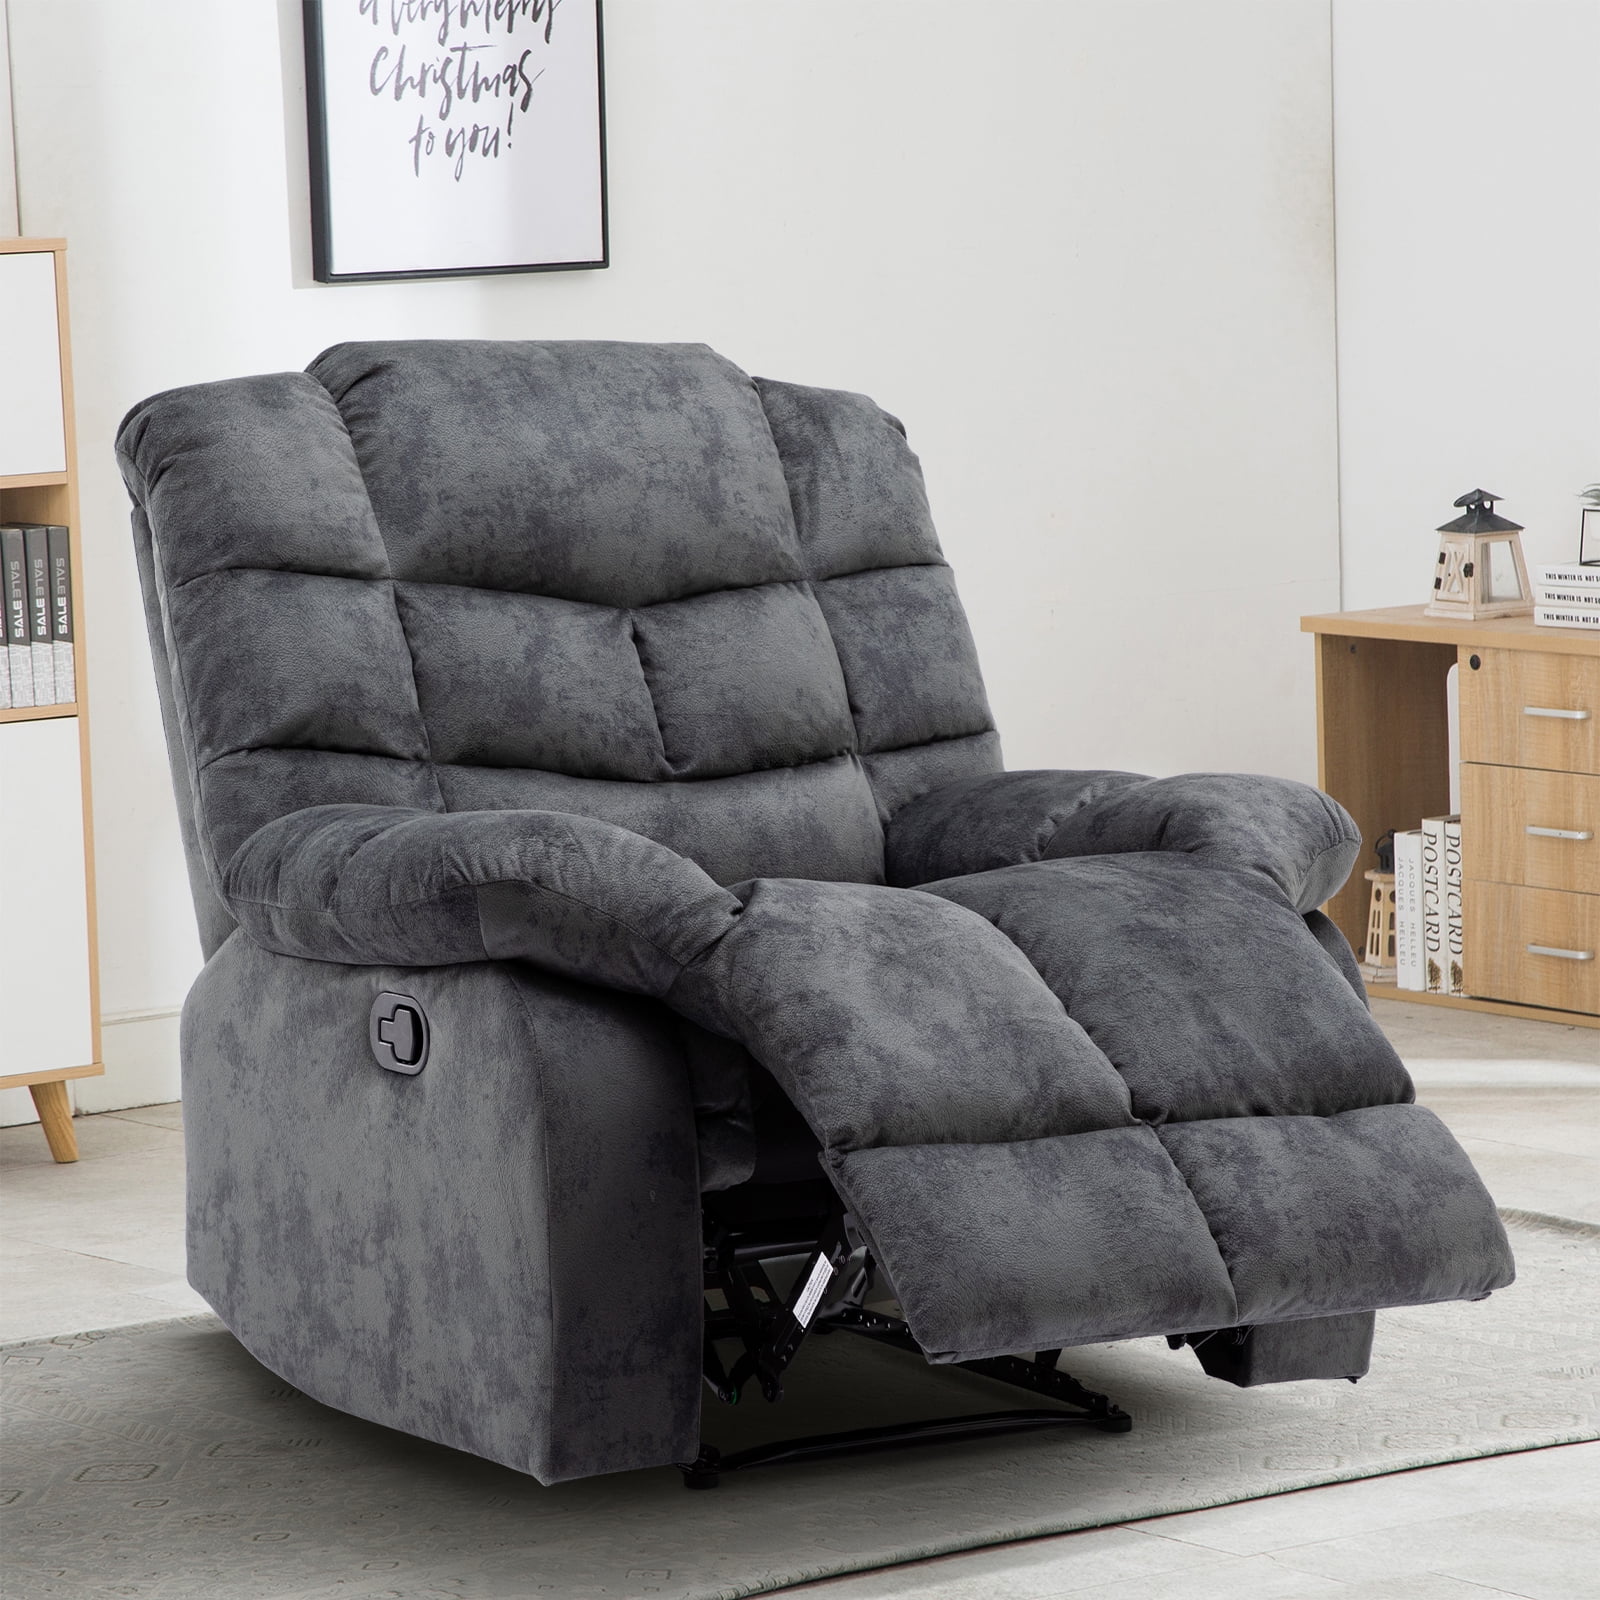 Comfort: Finding the Perfect Cheap Recliner for Your Home插图4